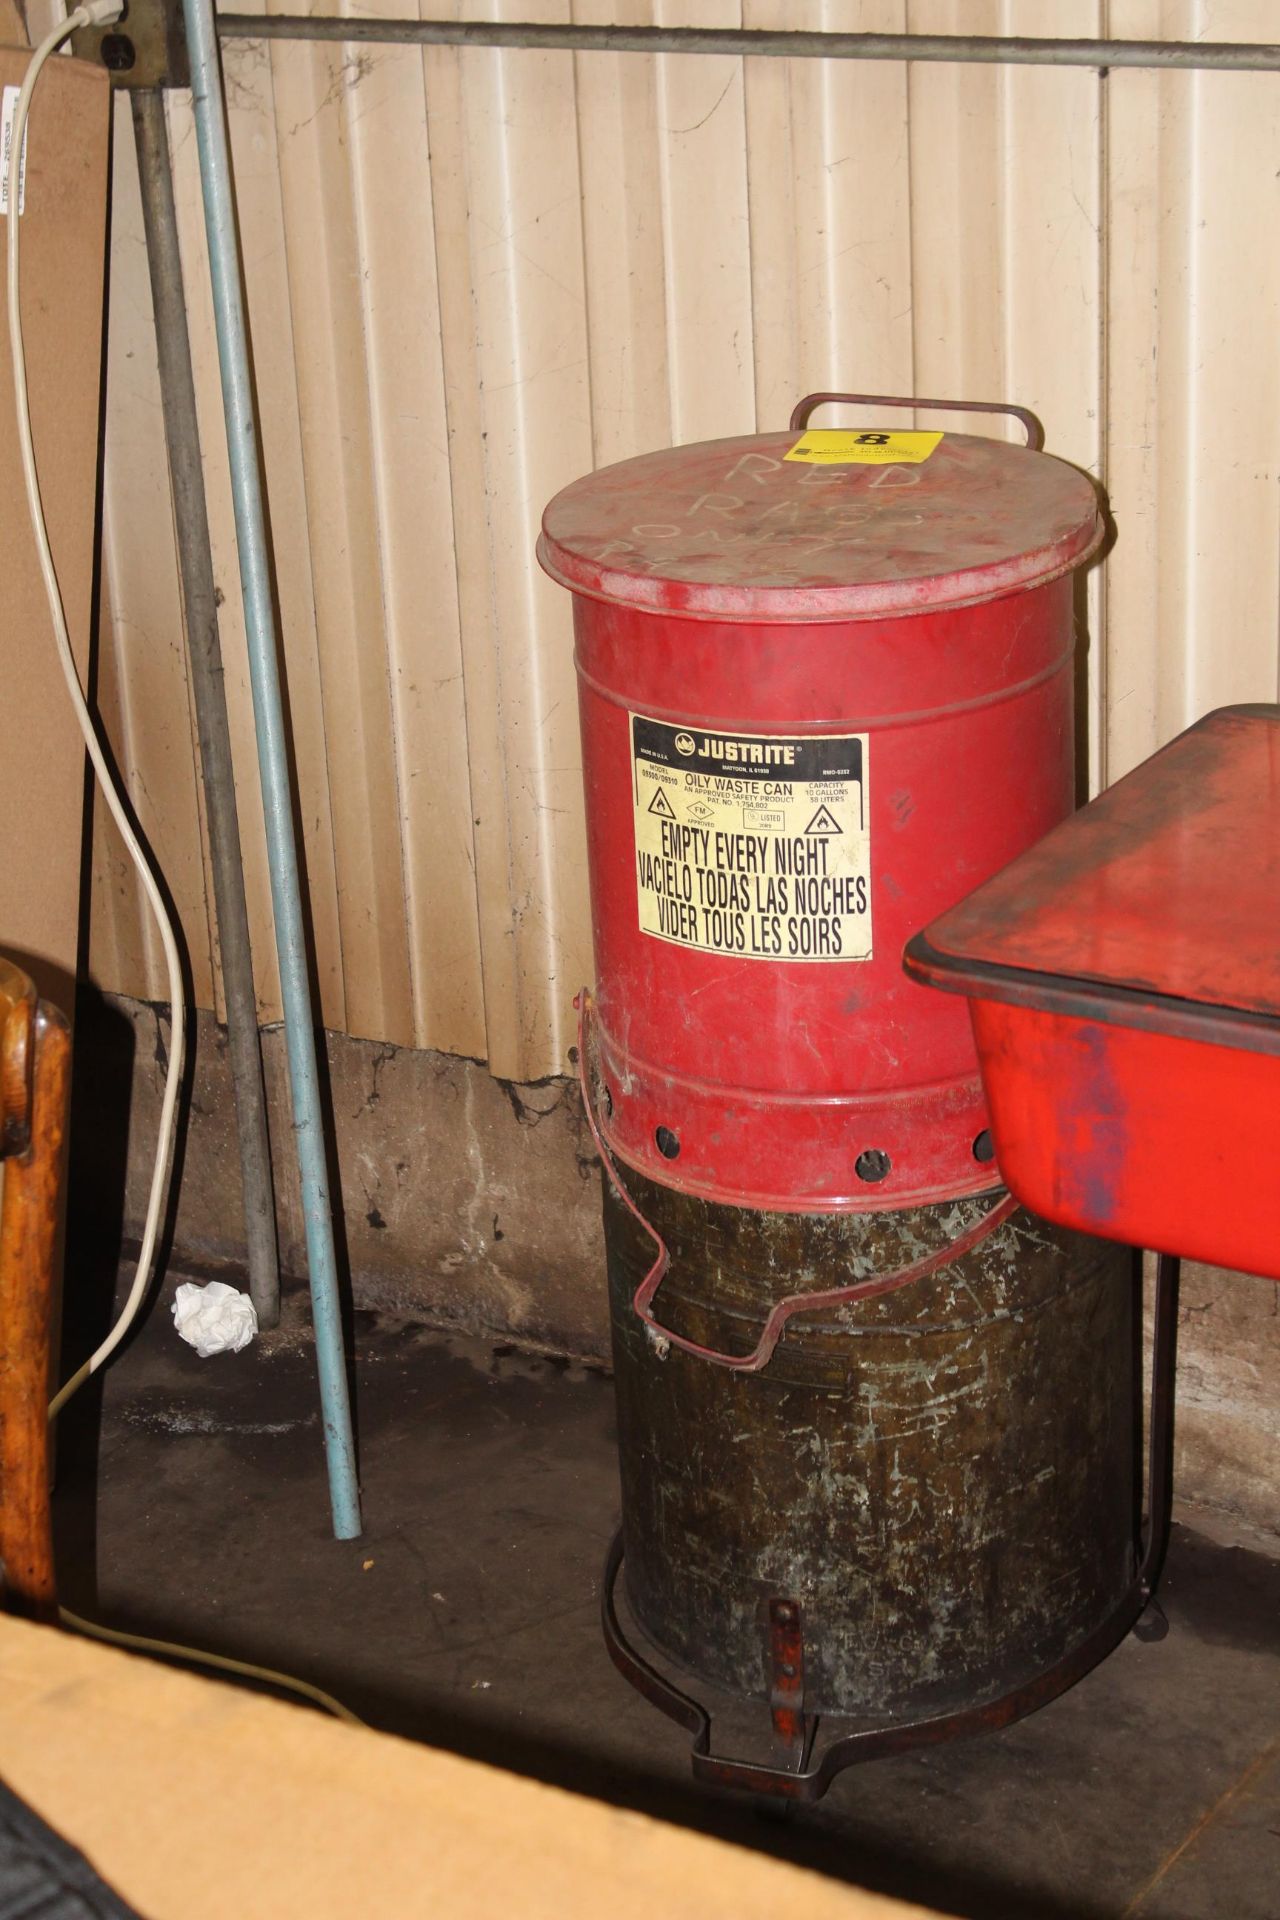 JUSTRITE OILY WASTE CANS